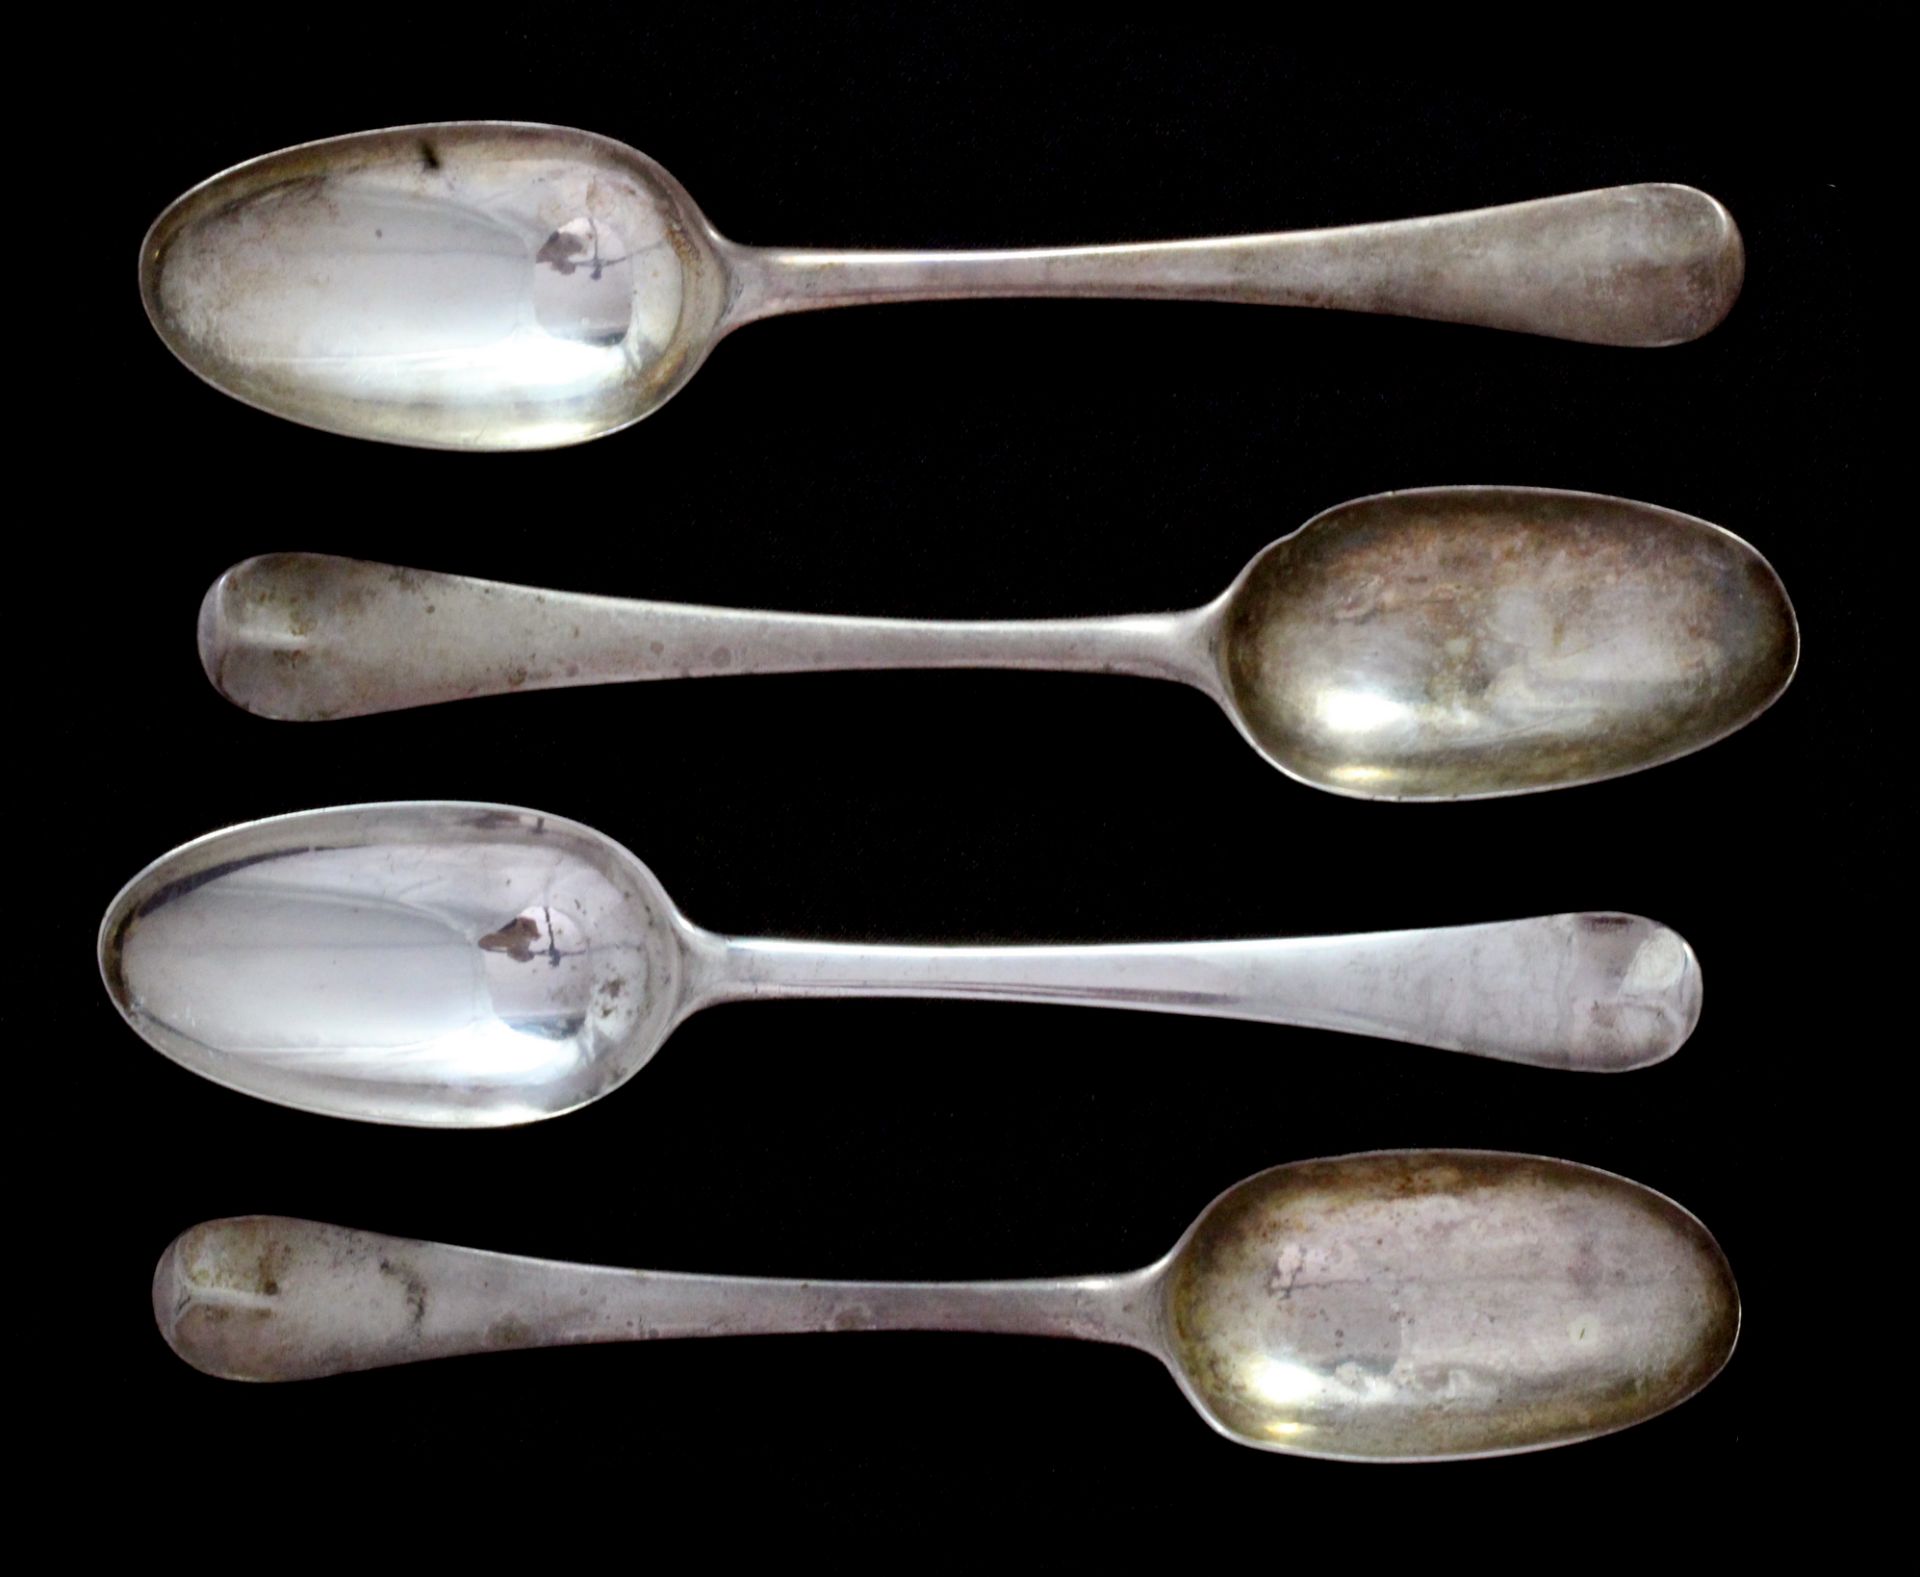 A set of four antique George II Sterling Silver tablespoons by Thomas Whipham, London 1746 in